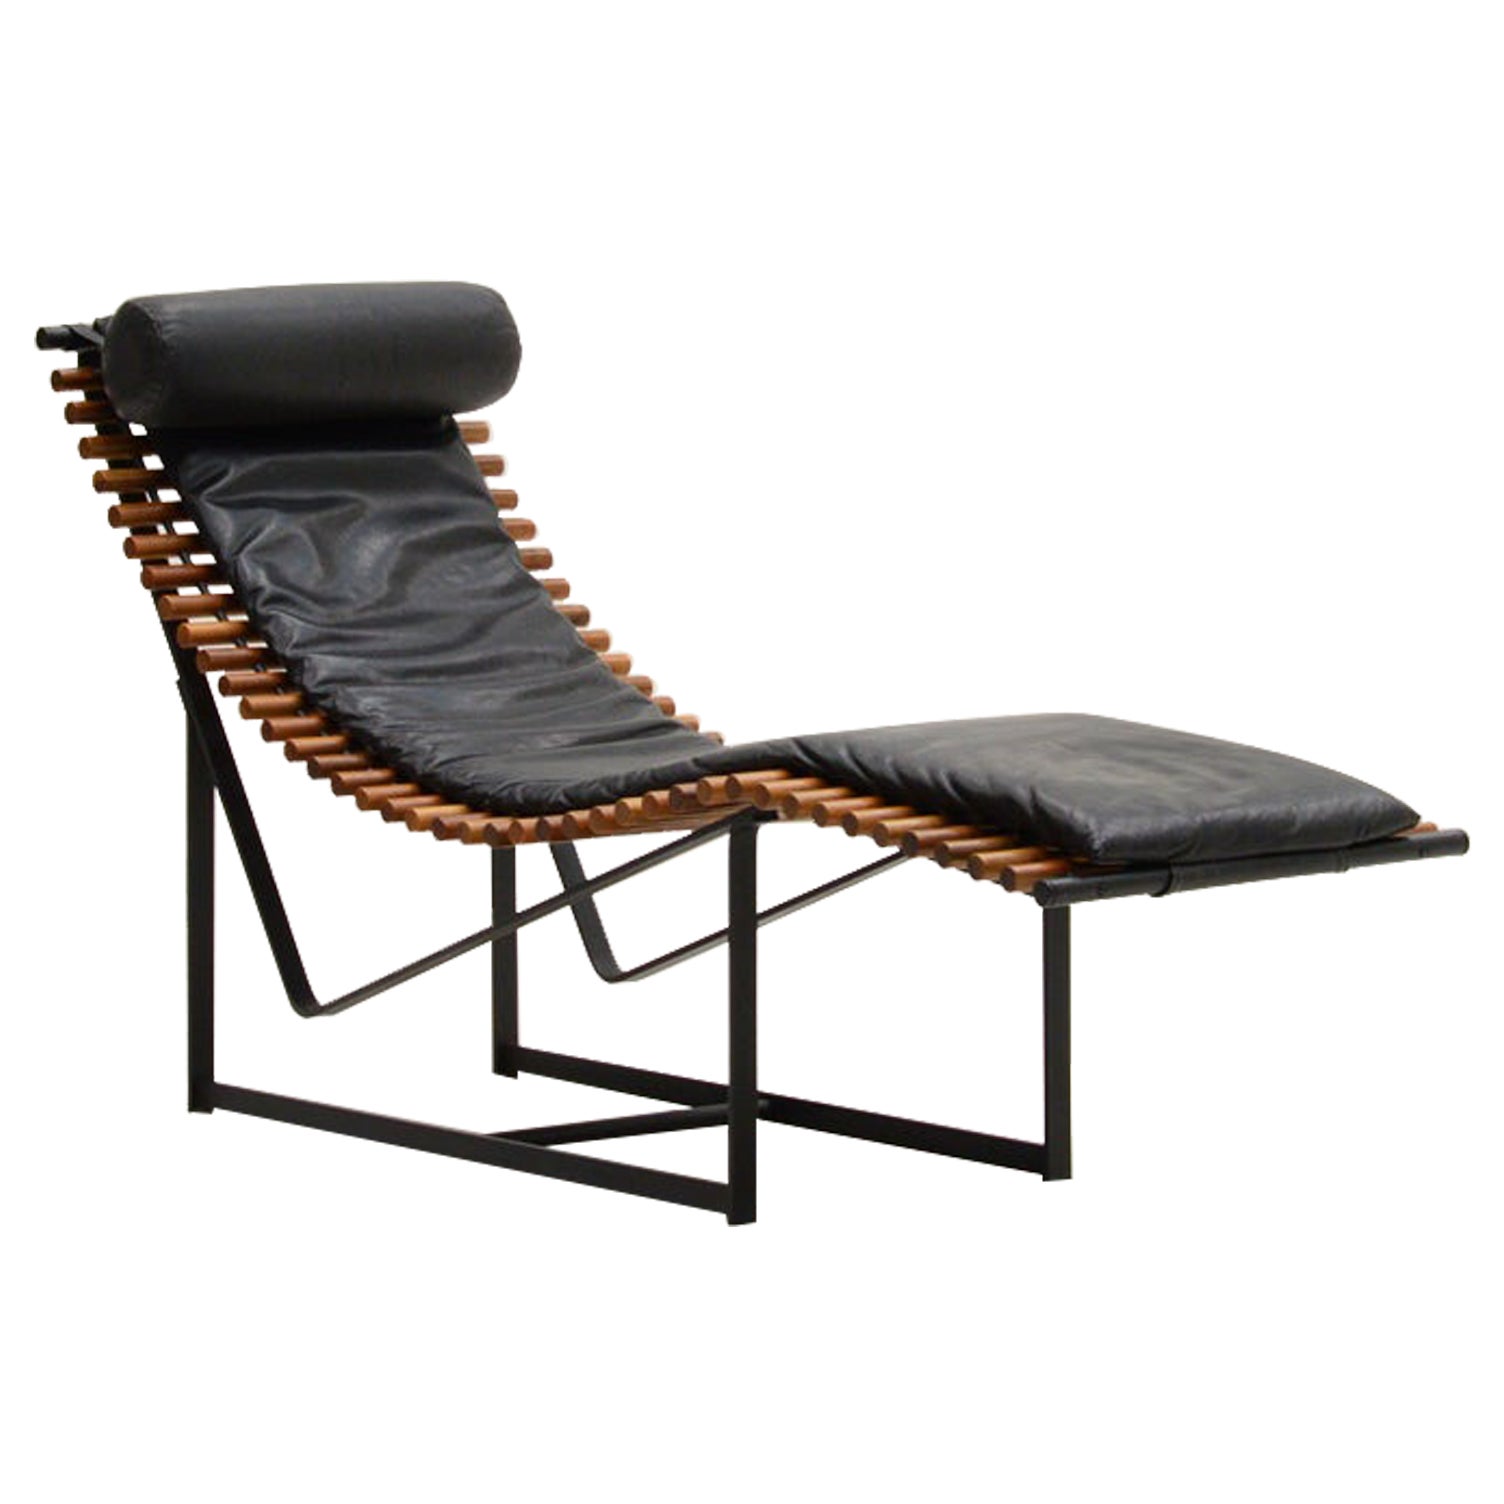 “Spine back” lounge chair by Peter Strassl, 1970s Germany. 